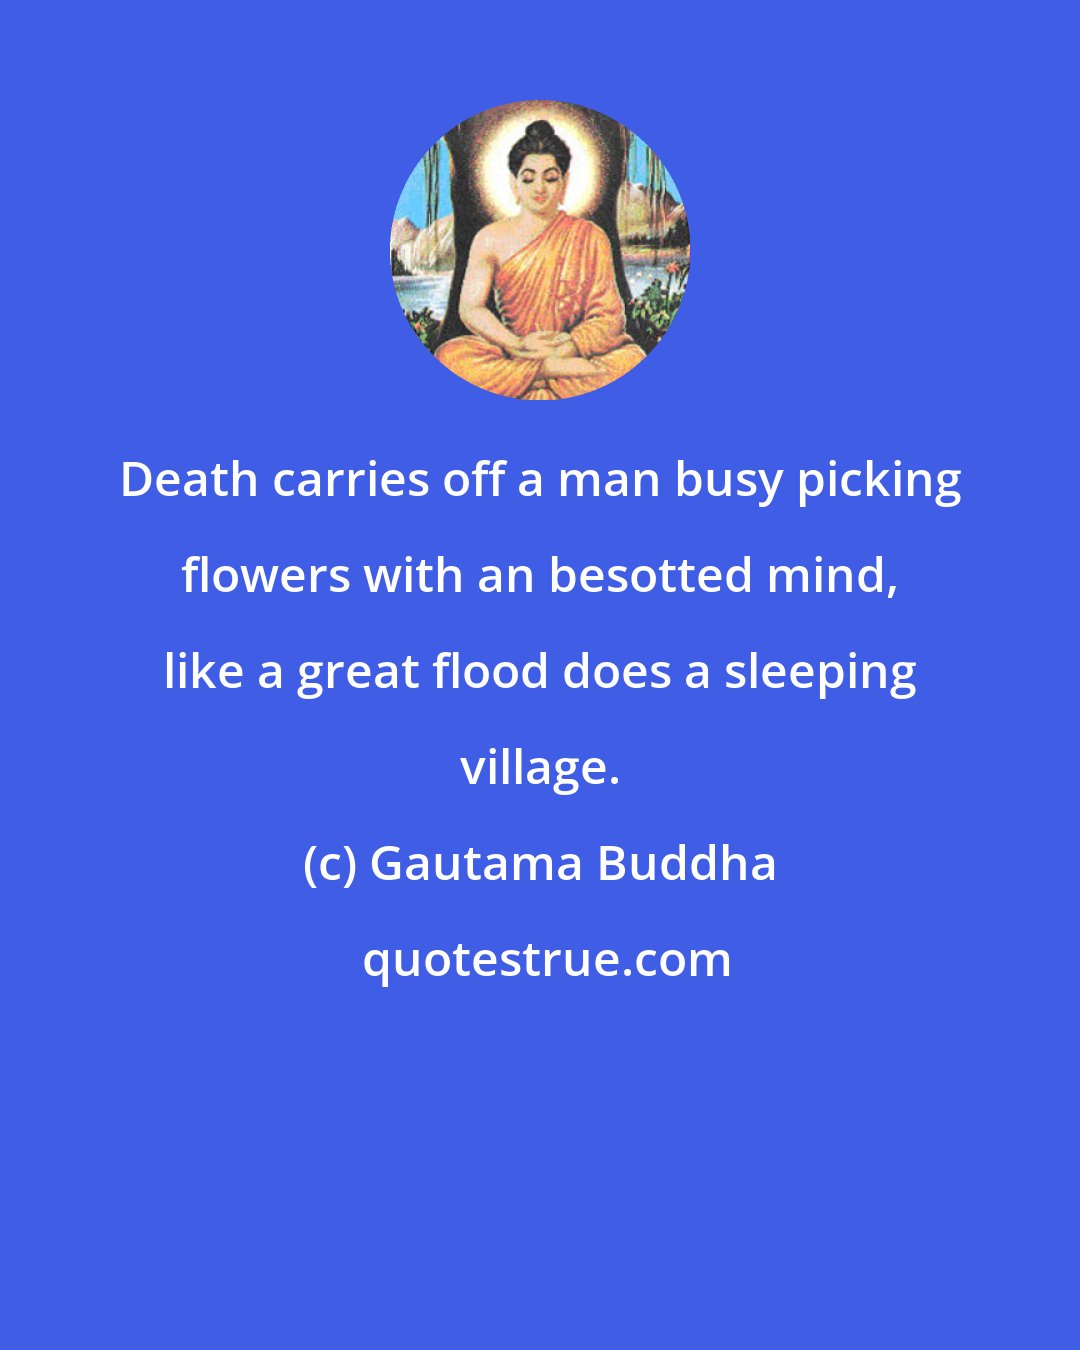 Gautama Buddha: Death carries off a man busy picking flowers with an besotted mind, like a great flood does a sleeping village.